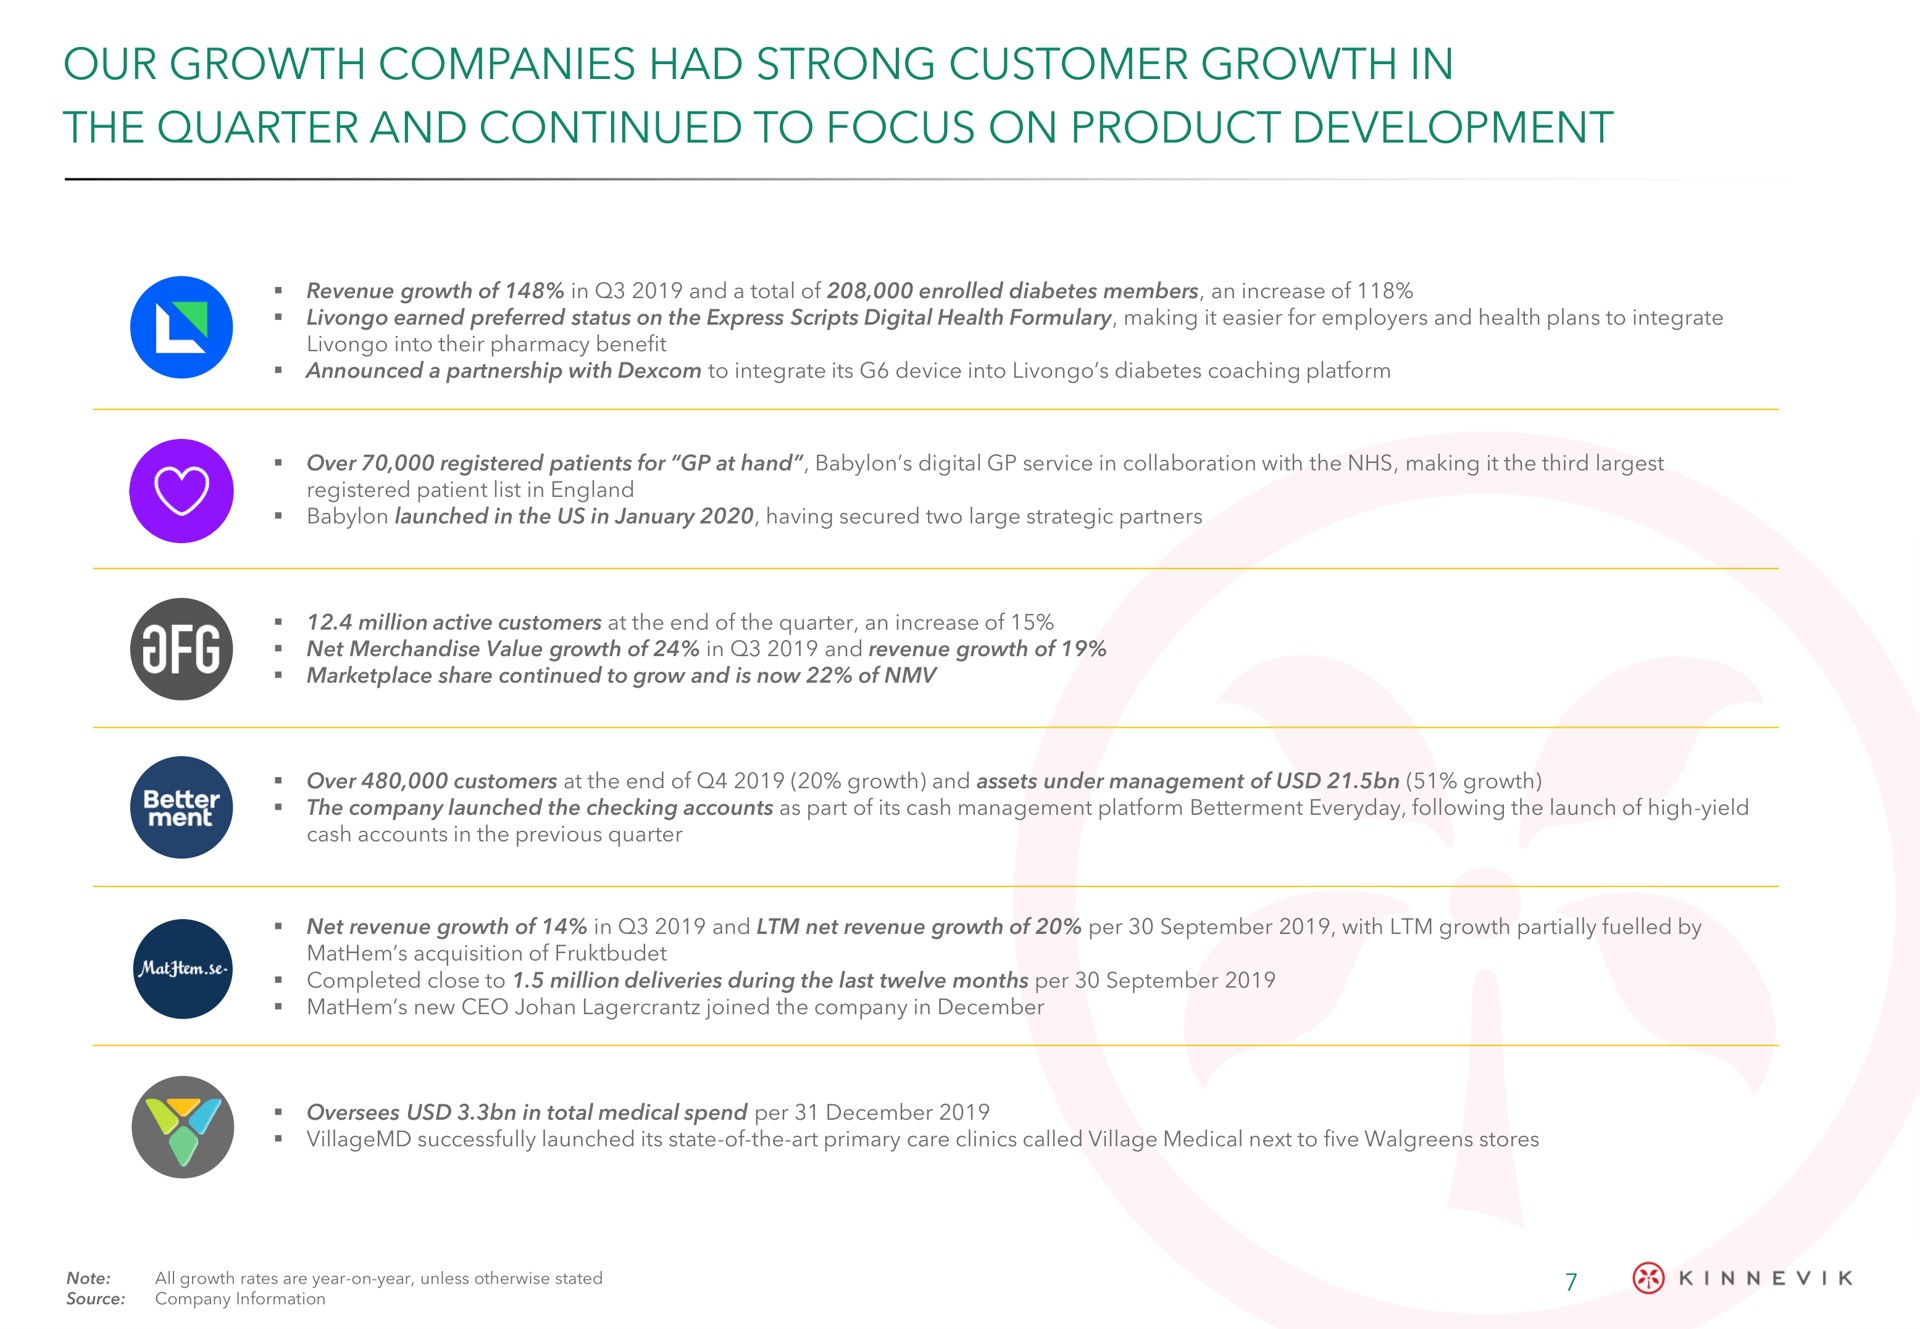 our growth companies had strong customer growth in the quarter and continued to focus on product development | Kinnevik